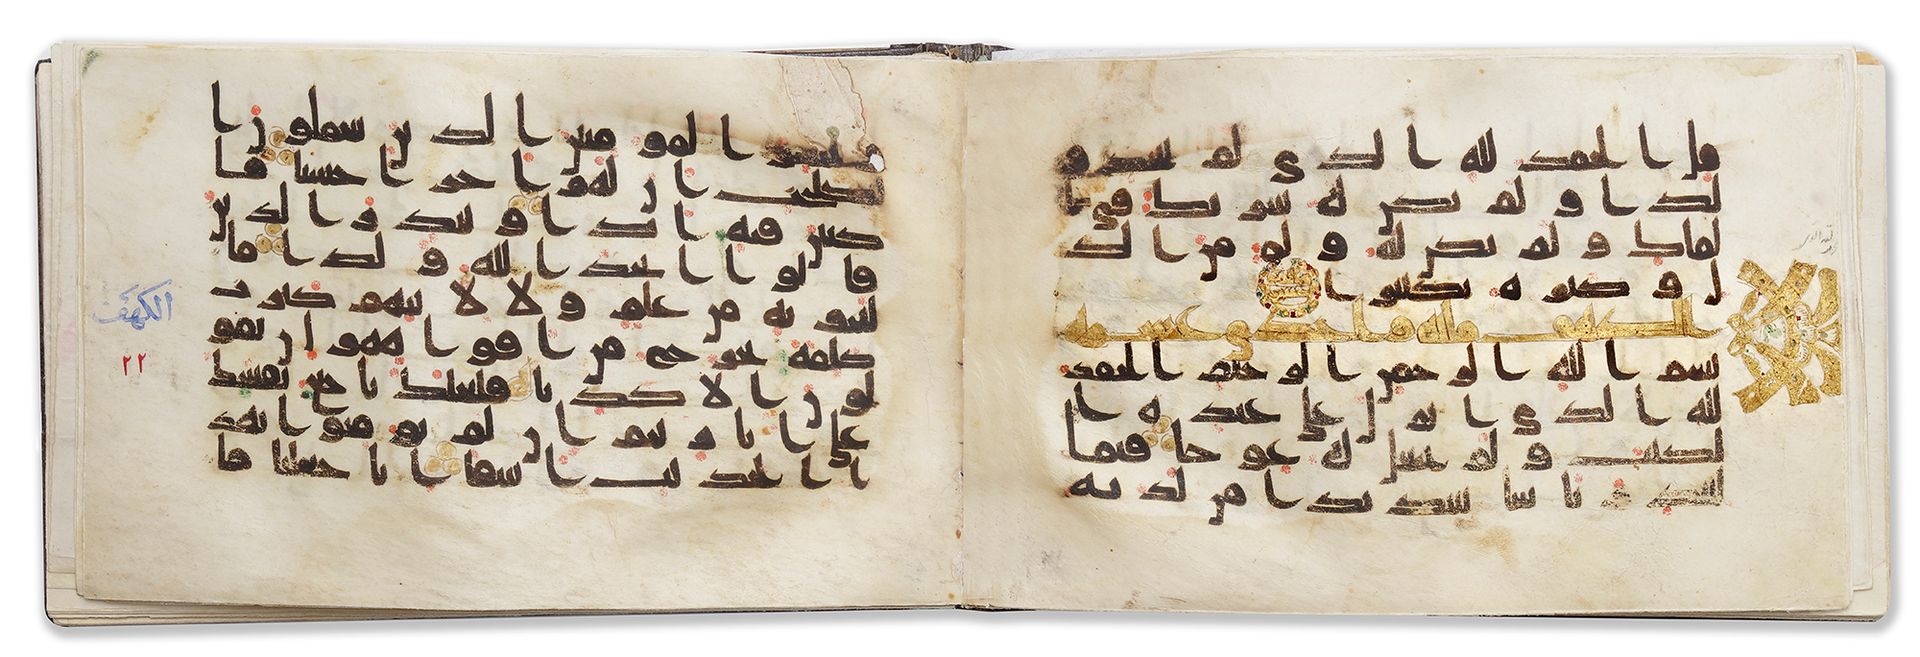 A KUFIC QURAN SECTION NEAR EAST OR NORTH AFRICA, 9TH CENTURY 牛皮纸上的阿拉伯文手稿，33页，每页9&hellip;